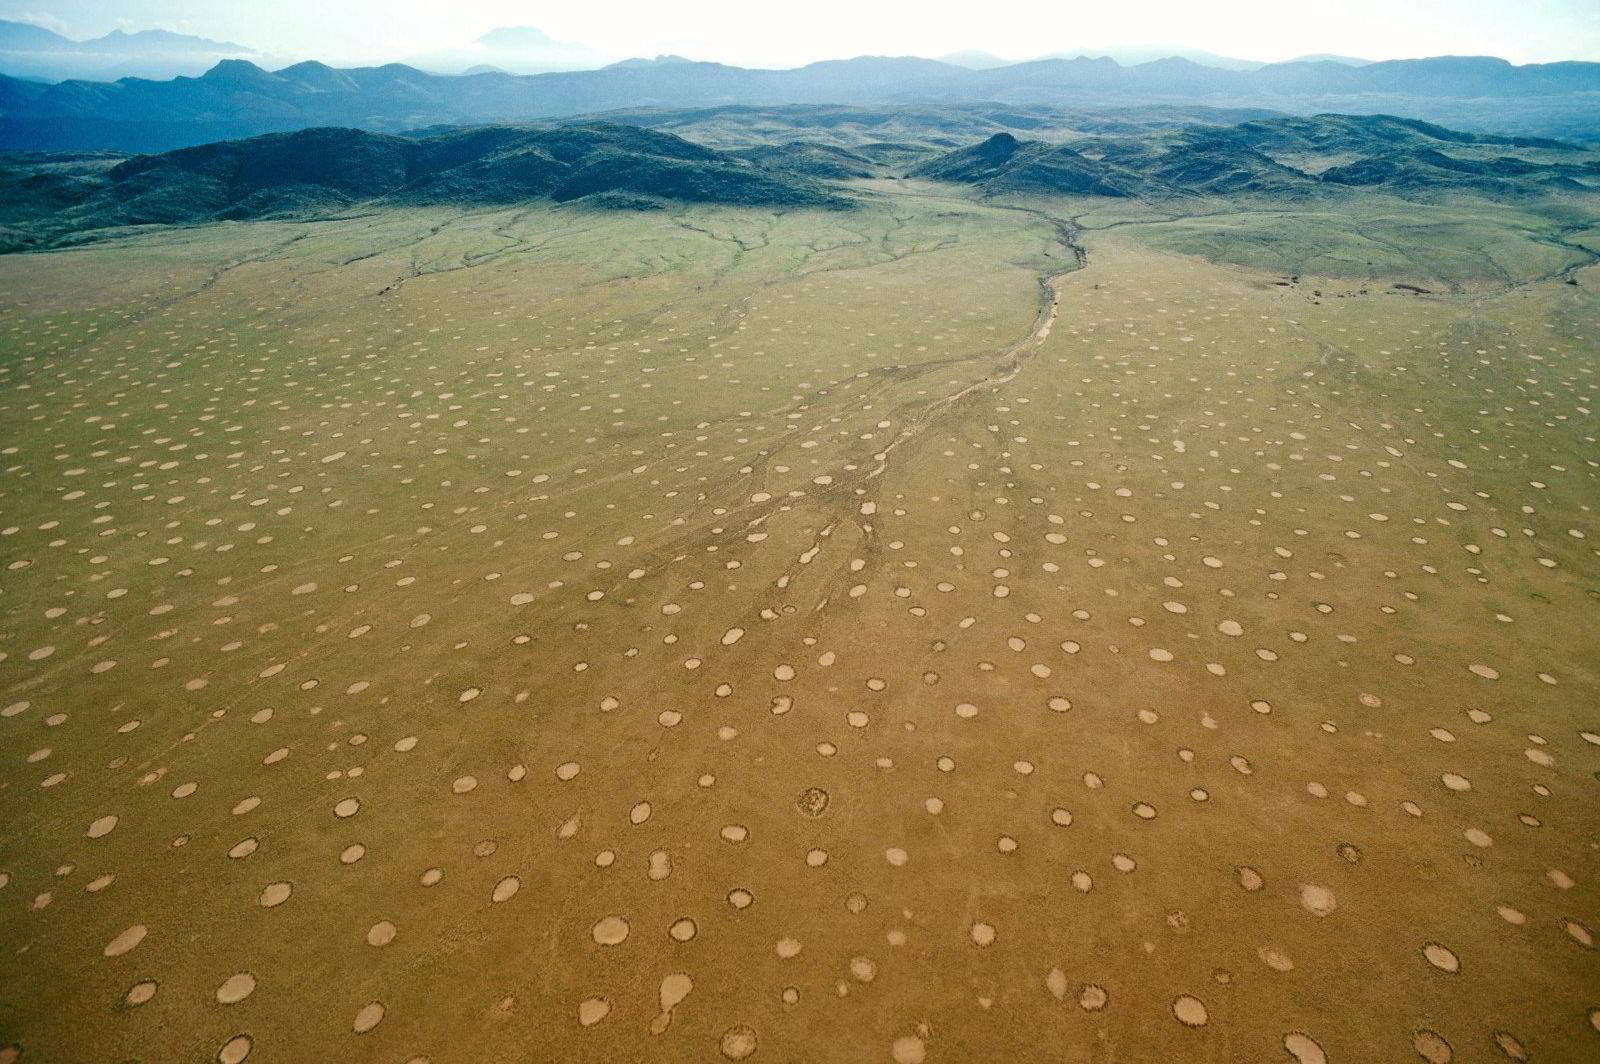 Is natural hydrogen of the fairy circles” the new eldorado?